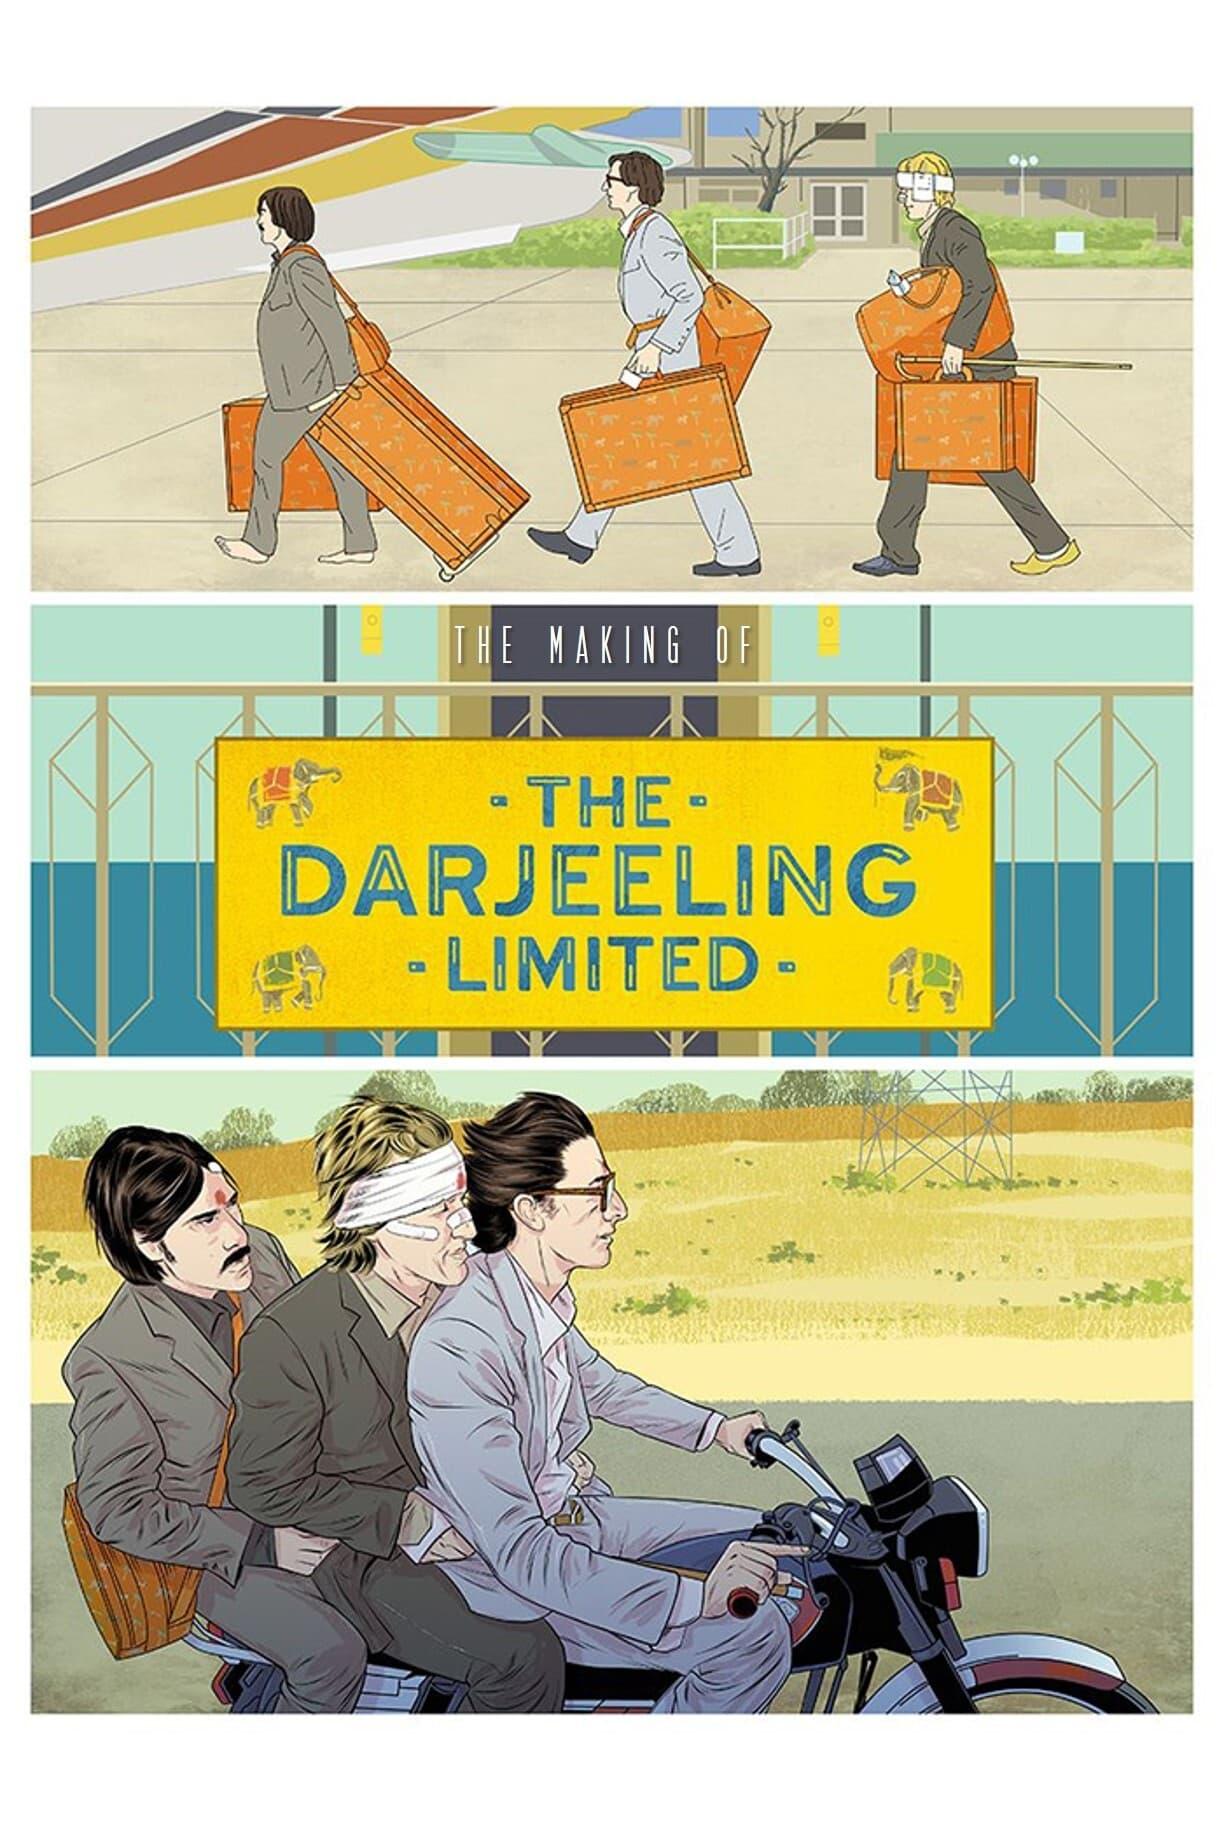 The Making of 'The Darjeeling Limited' poster